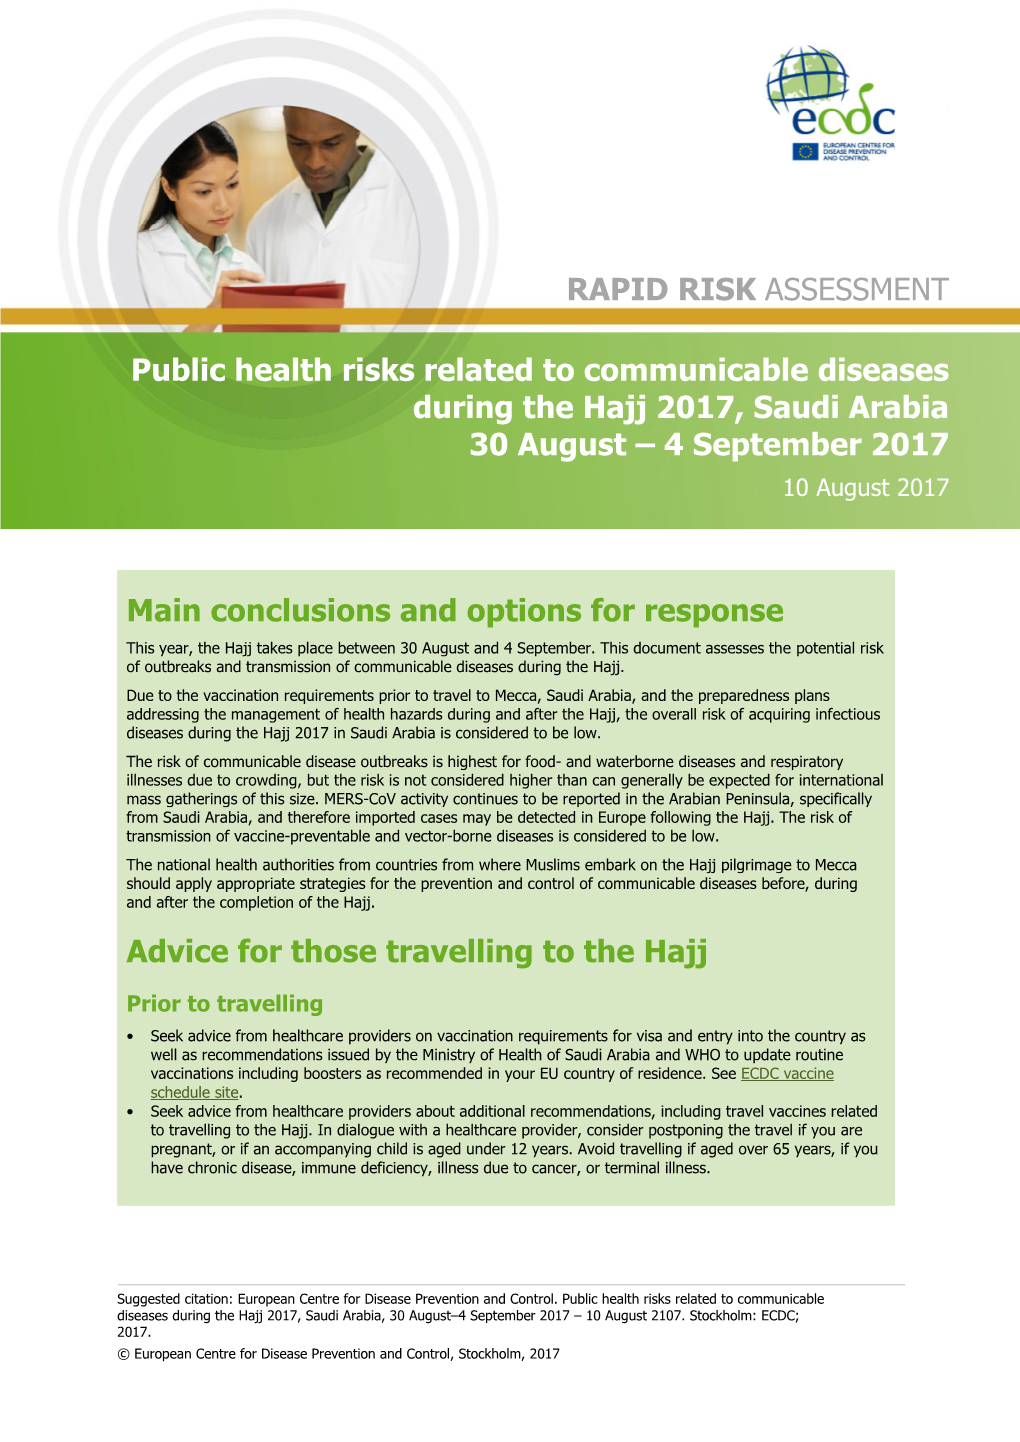 Public Health Risks Related to Communicable Diseases During the Hajj 2017, Saudi Arabia 30 August – 4 September 2017 10 August 2017